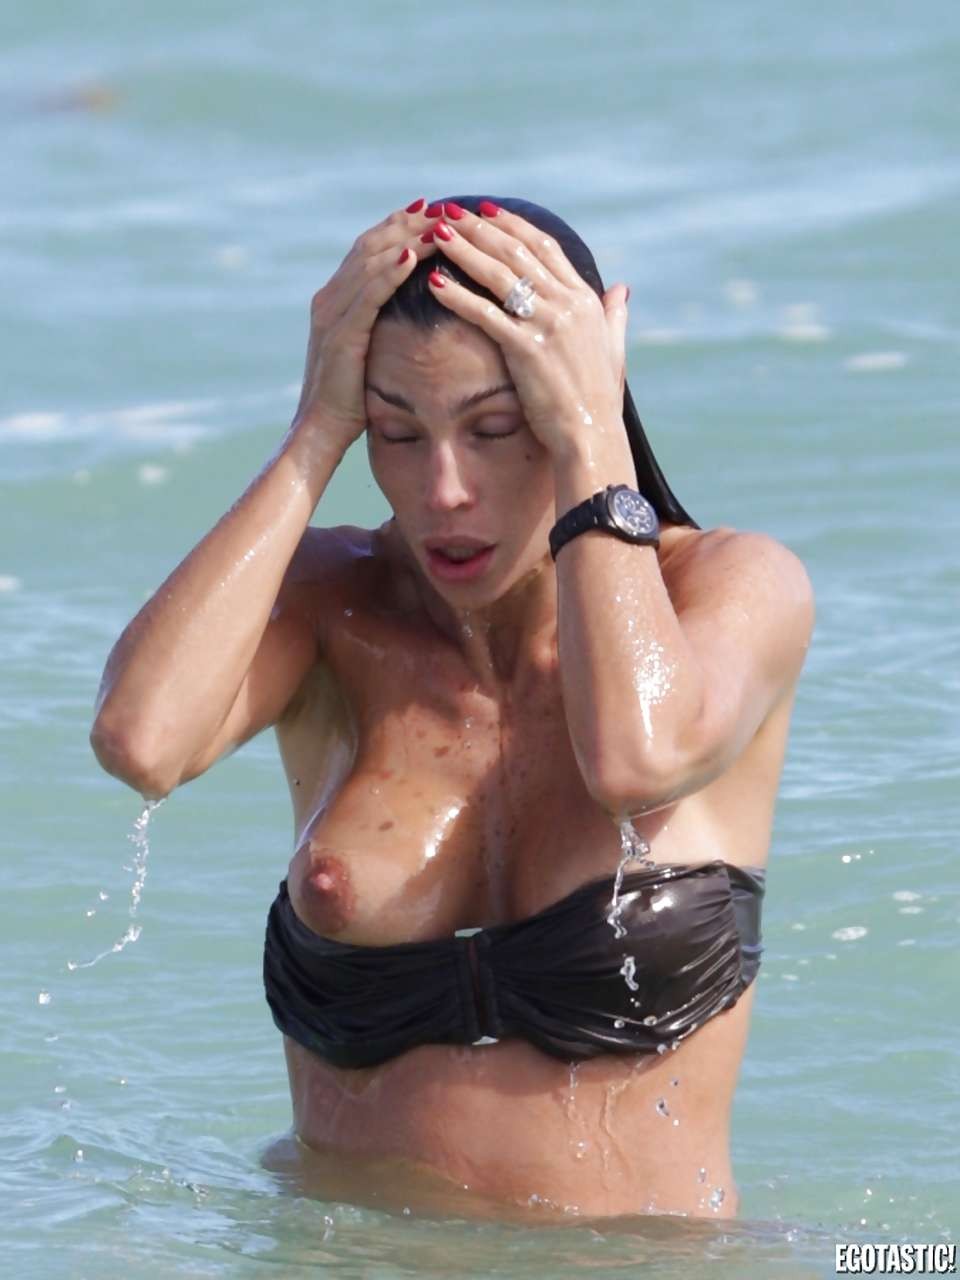 Claudia Galanti showing her nice big boobs on beach paparazzi pictures #75279869